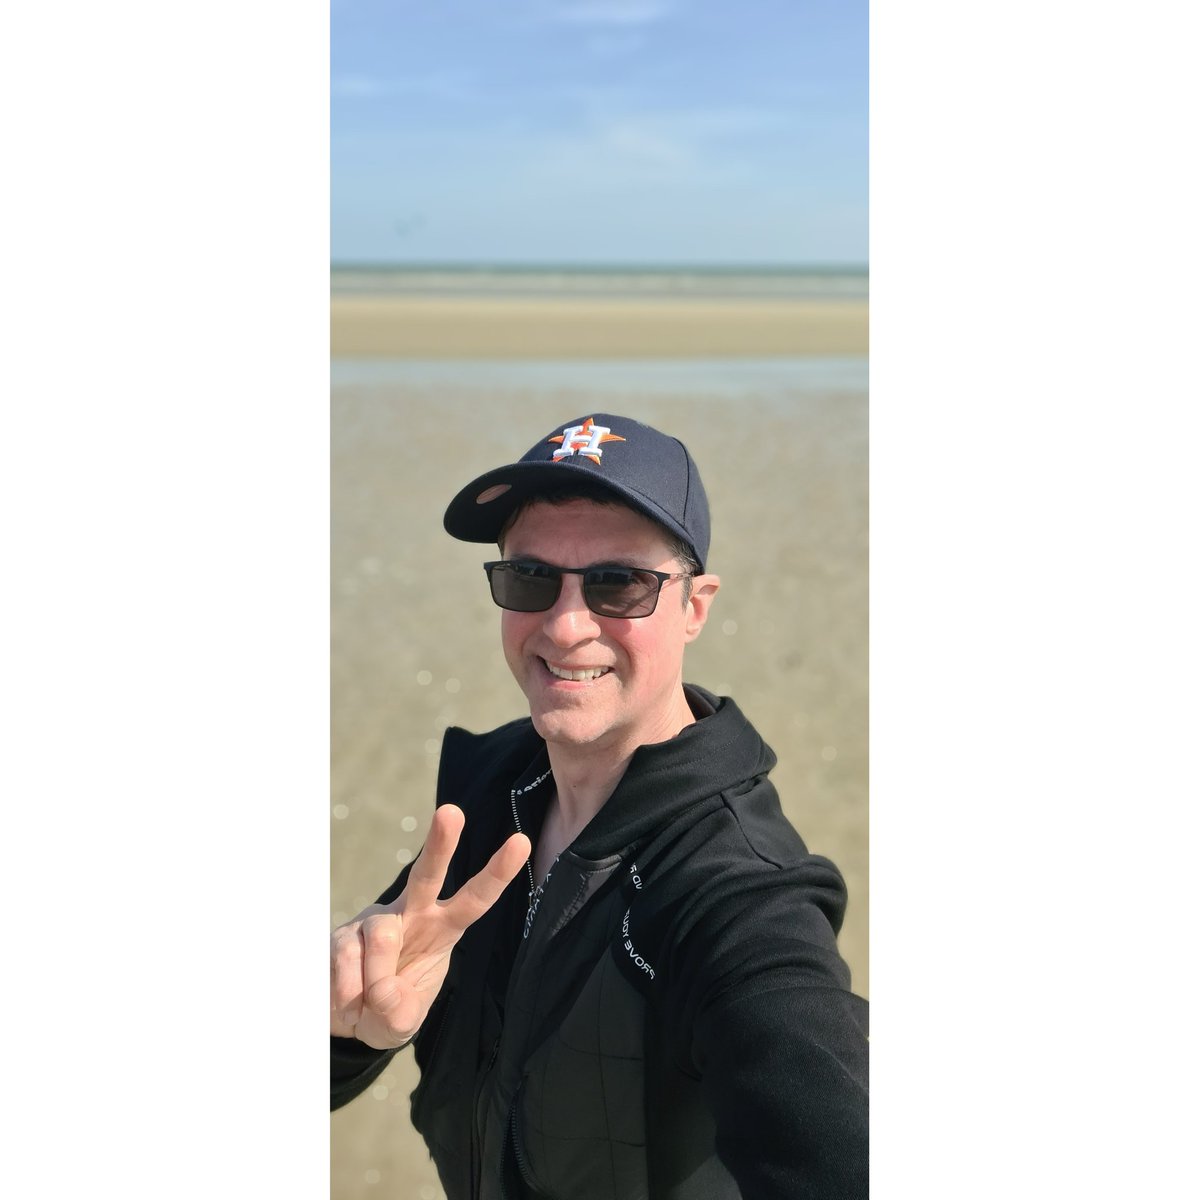 🌟 𝕊𝔸𝕃𝕌𝕋 𝕃𝔼𝕊 𝕎𝕀ℕℕ𝔼ℝ𝕊 😘🌴✨️
☆
#onthebeach #sunny #Normandie #cabourgmonamour #france #youwin